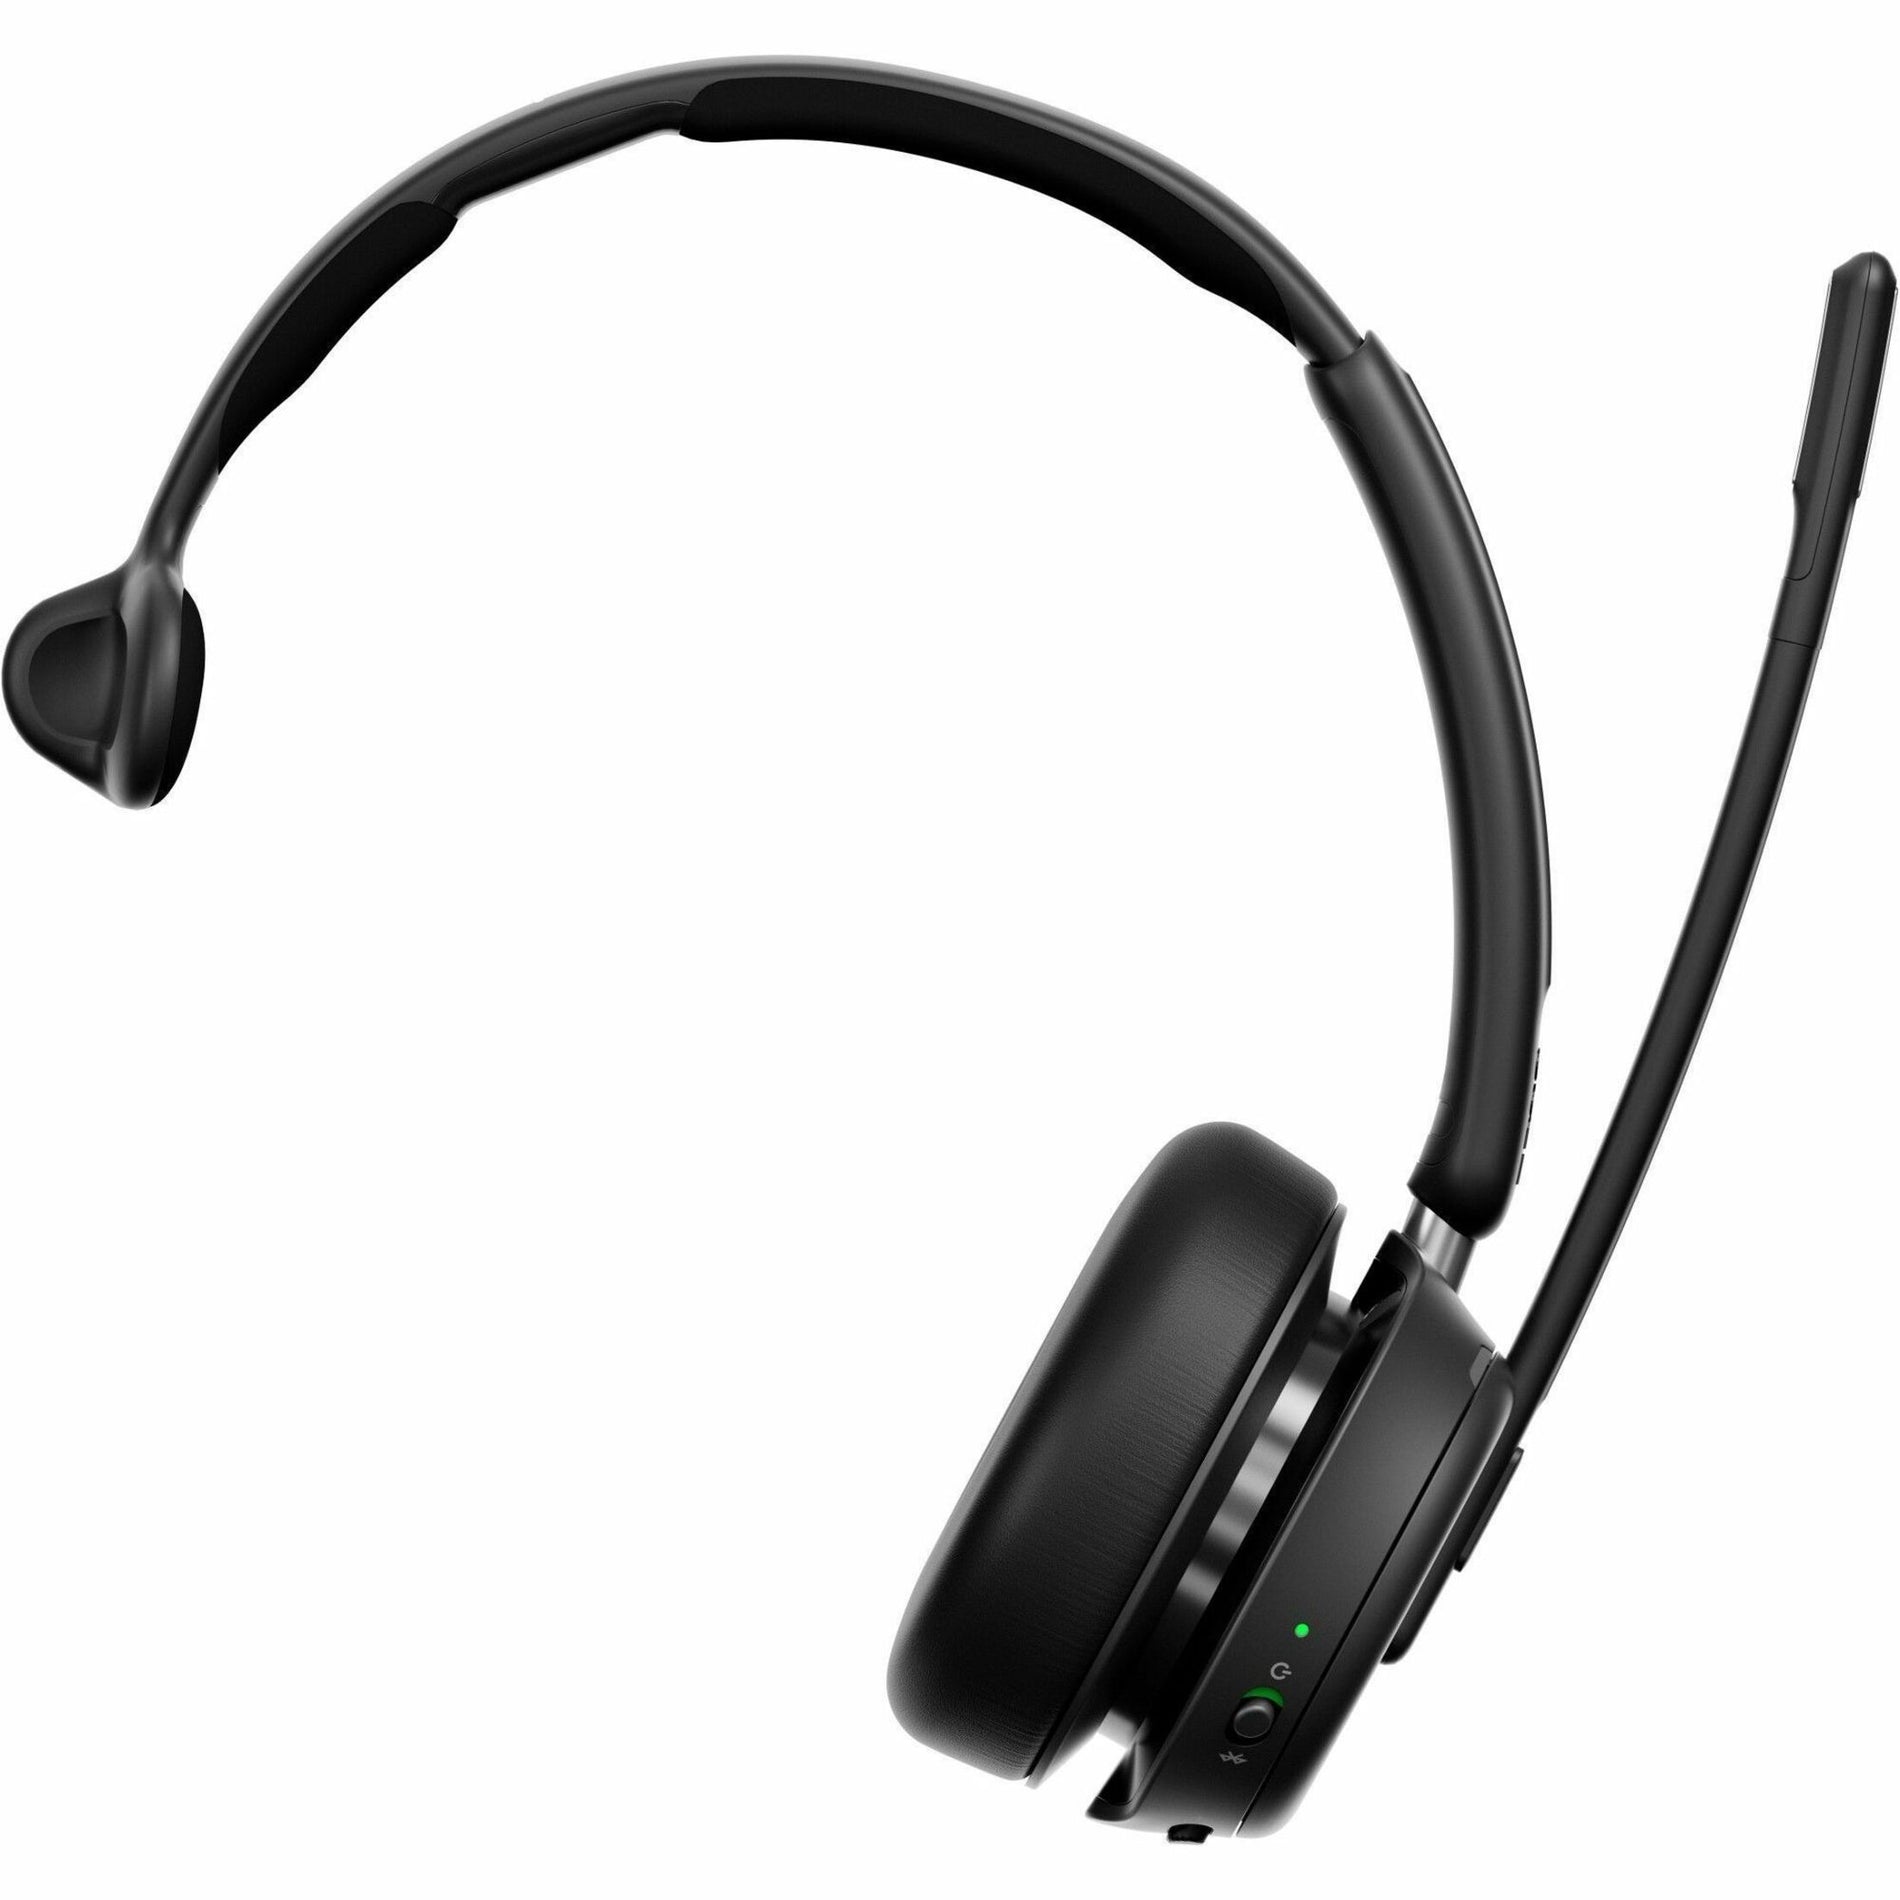 EPOS IMPACT 1030T Wireless Monaural Headset - Active Noise Canceling, USB Charging [Discontinued]